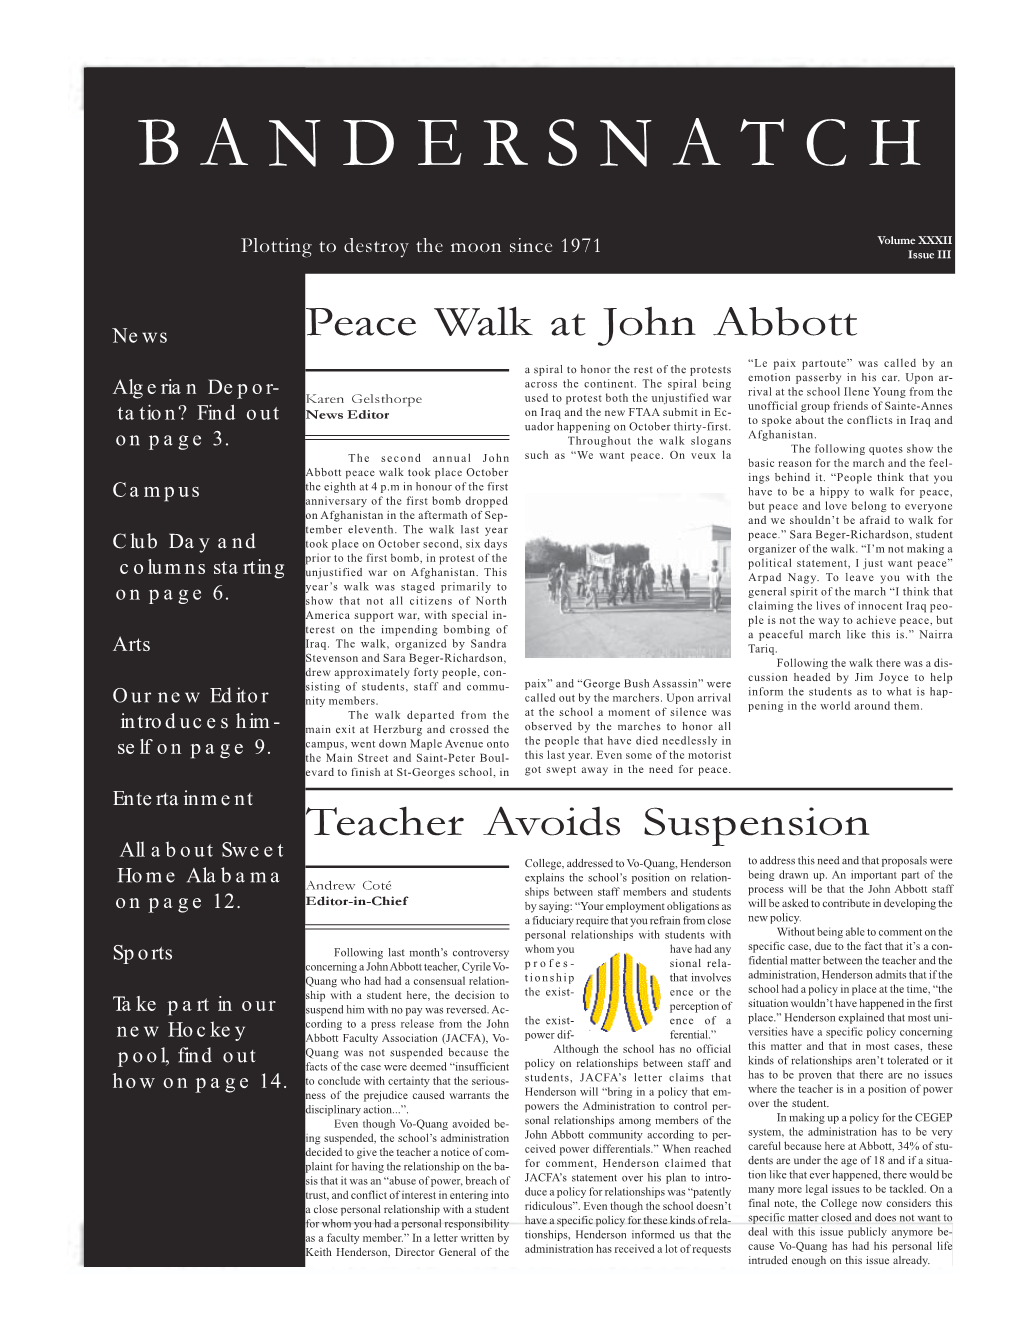 BANDERSNATCH John Abbott College on the Side with Your Editor-In-Chief Andrew Coté P.O